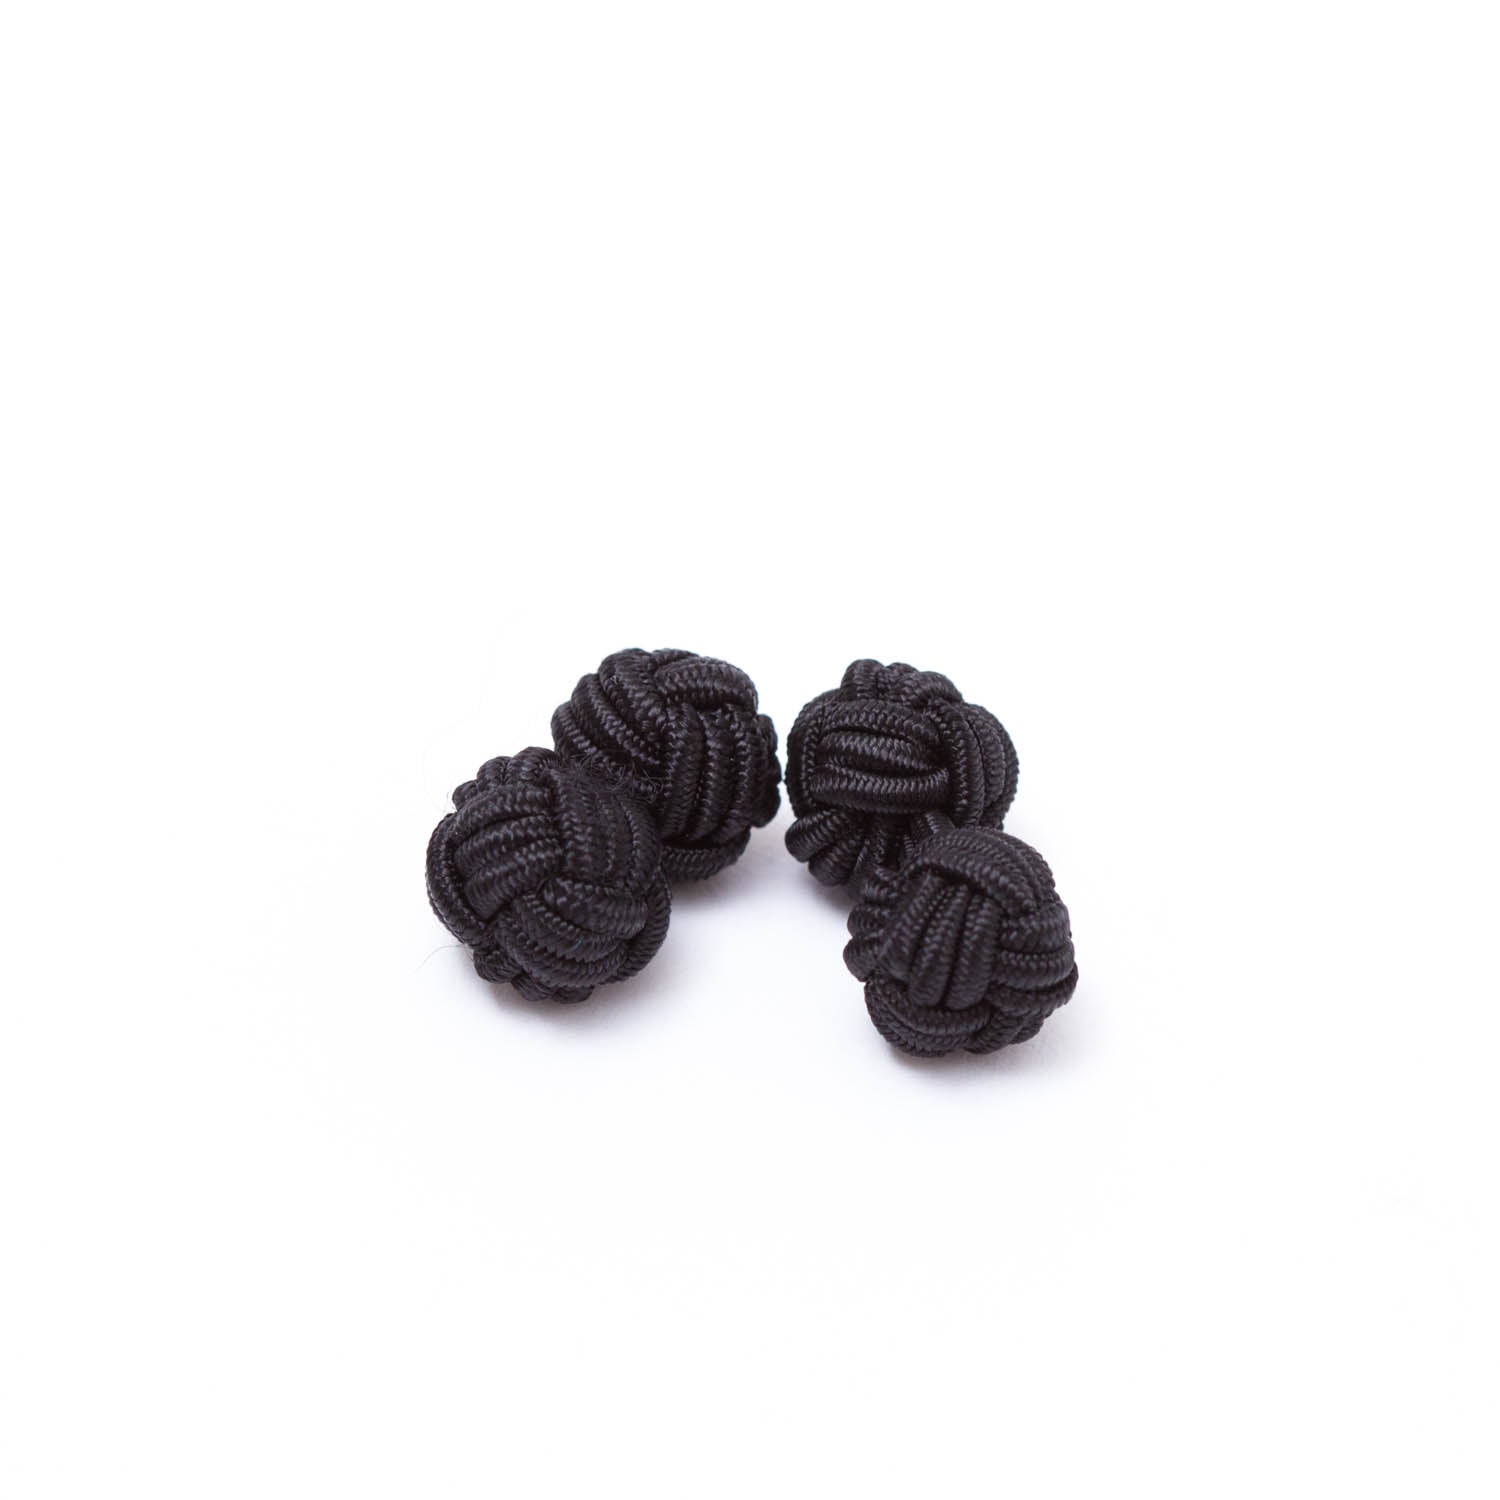 Four handmade black Solid Knot Cuff Links on a white surface. (Brand: KirbyAllison.com)